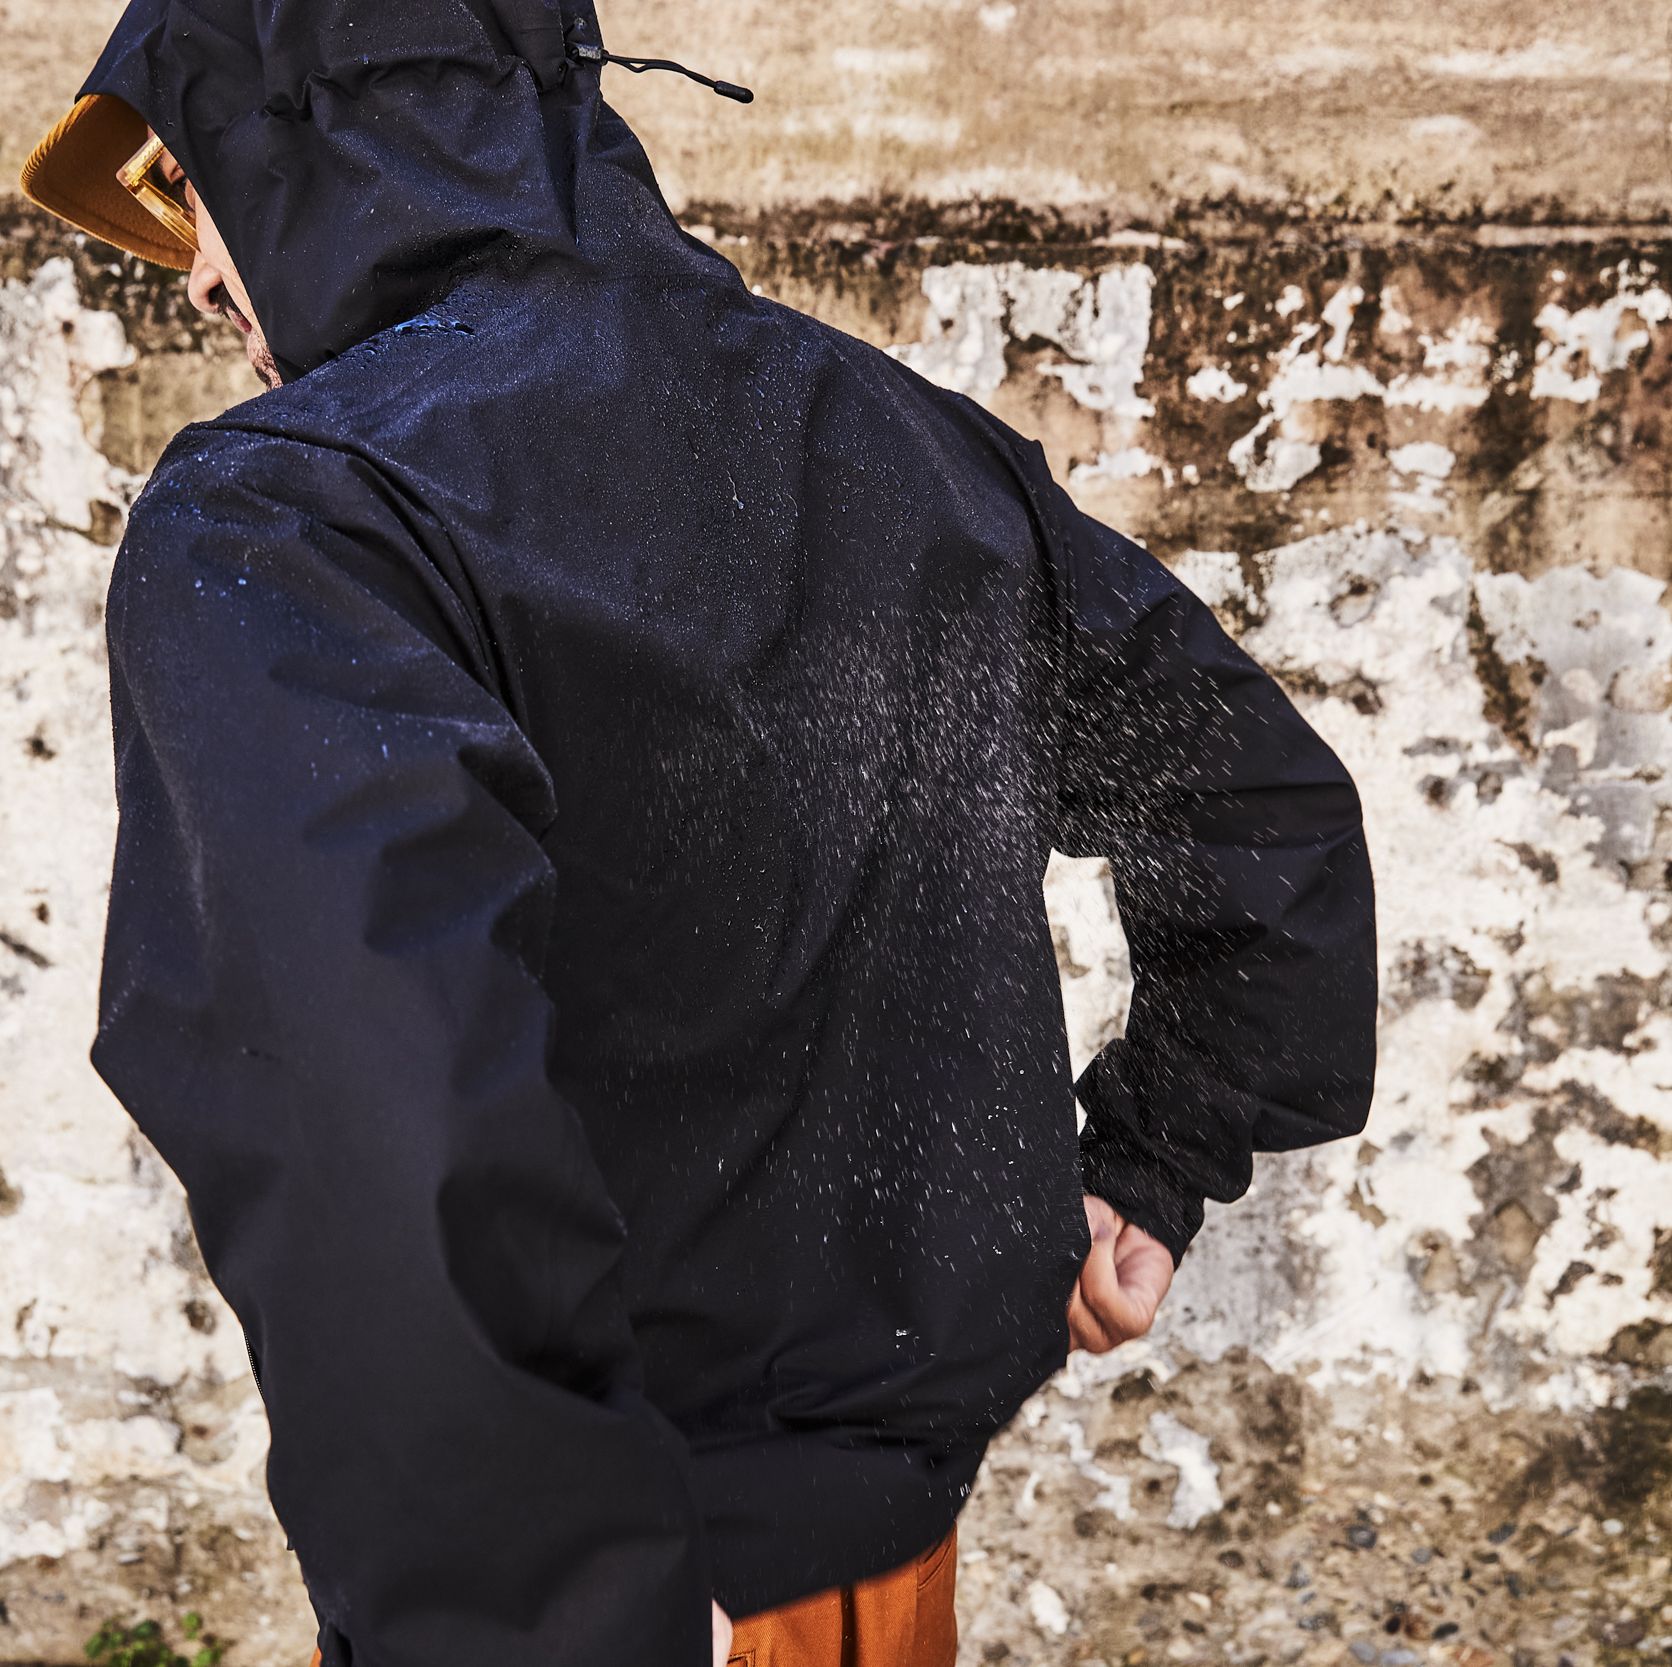 Brave the Bad Weather in These Rain Jackets for Men